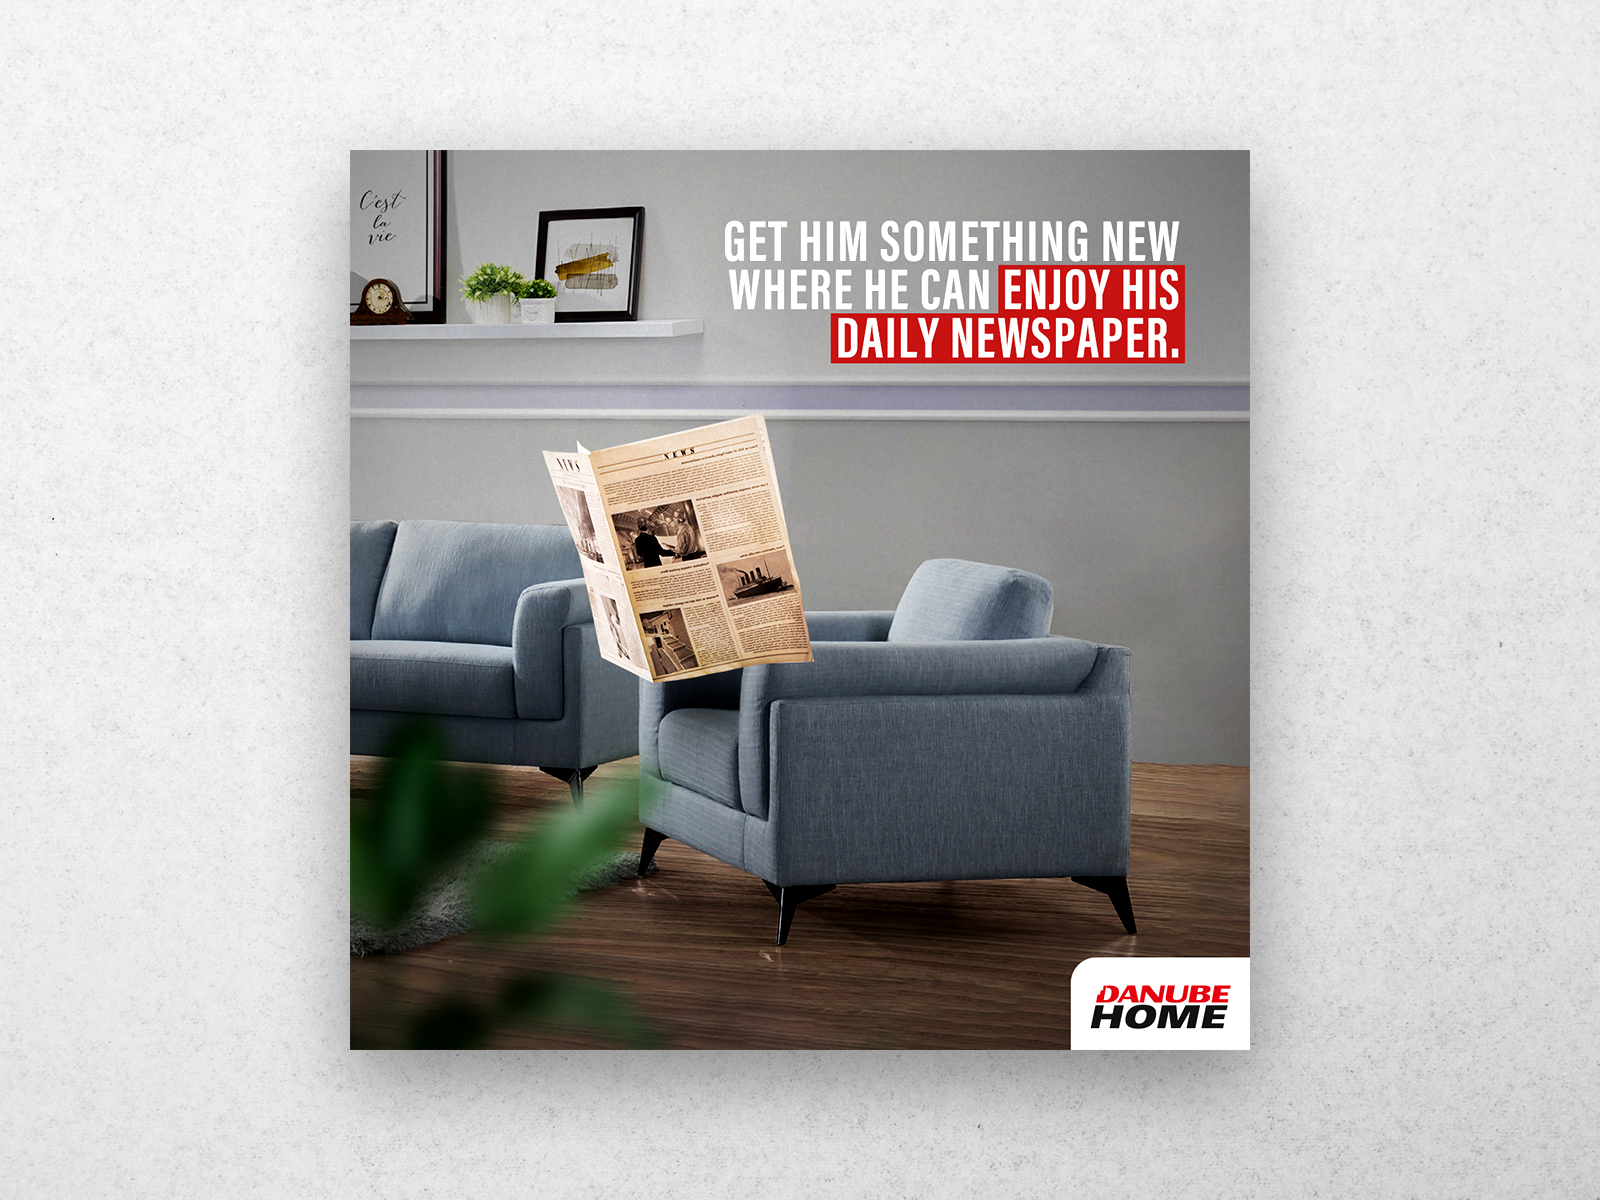 Fathers Day Creative On Furniture By Sridhar Bokka On Dribbble 5770